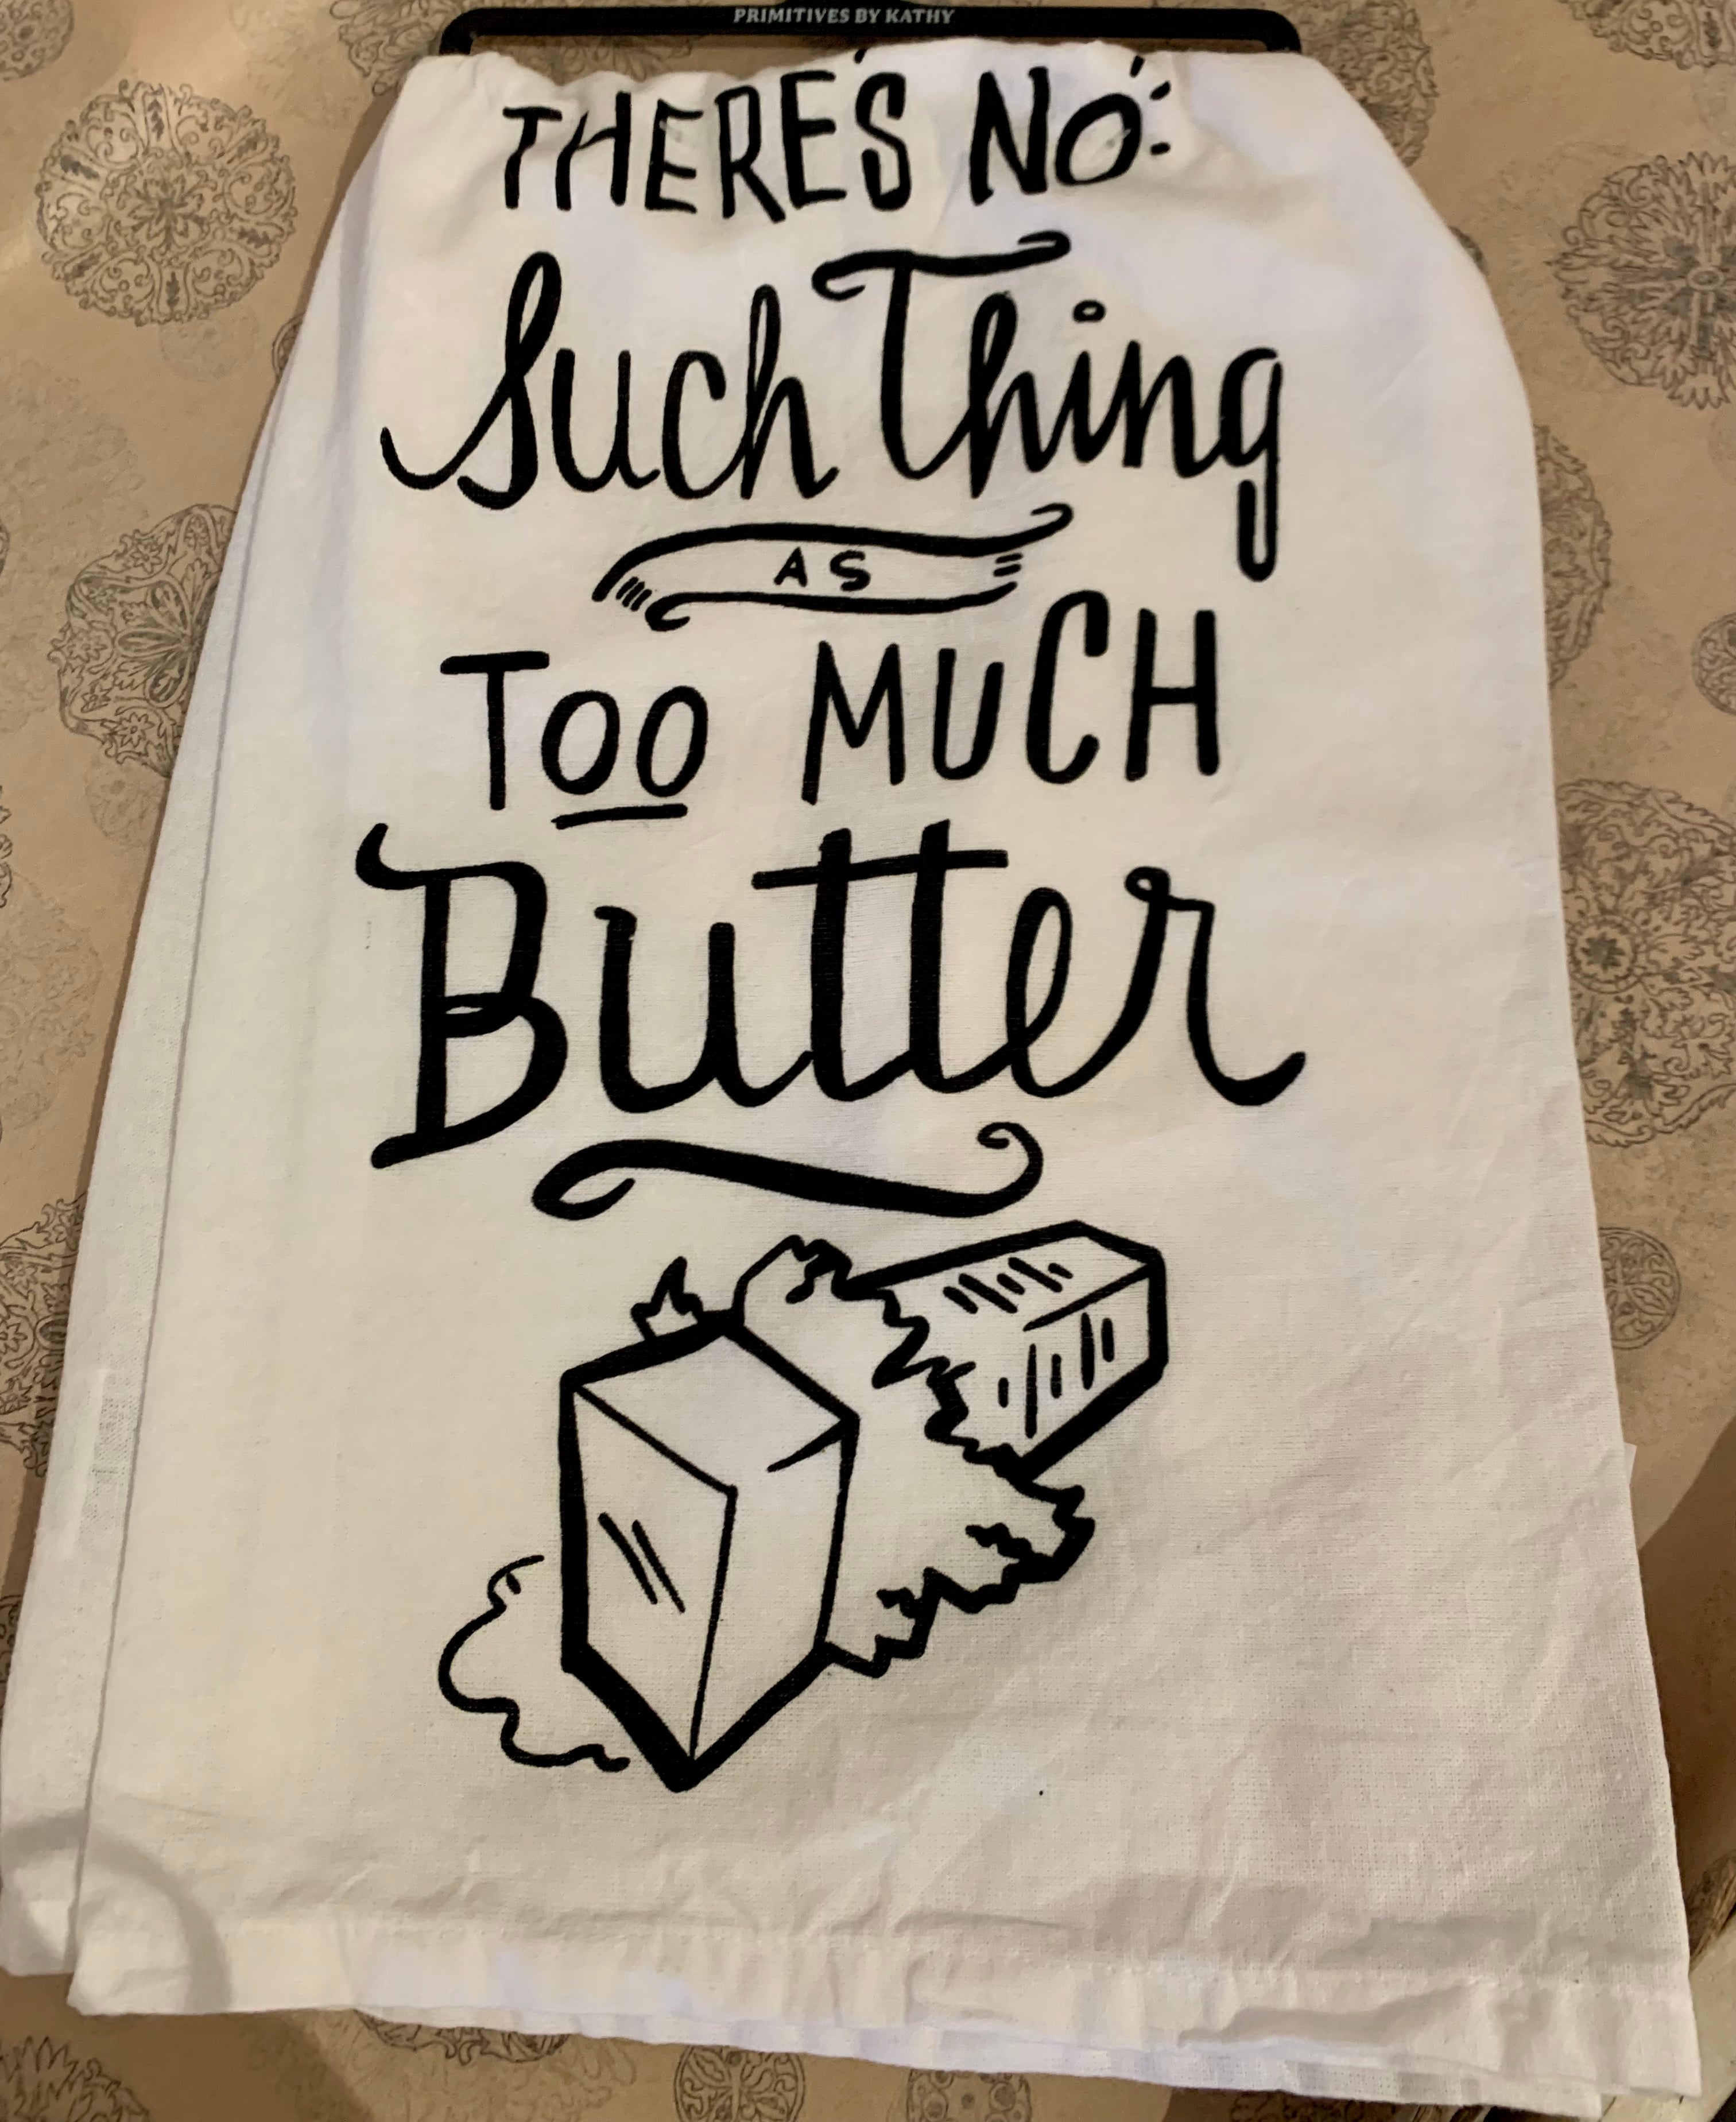 LOL- Made You Smile Kitchen Towels